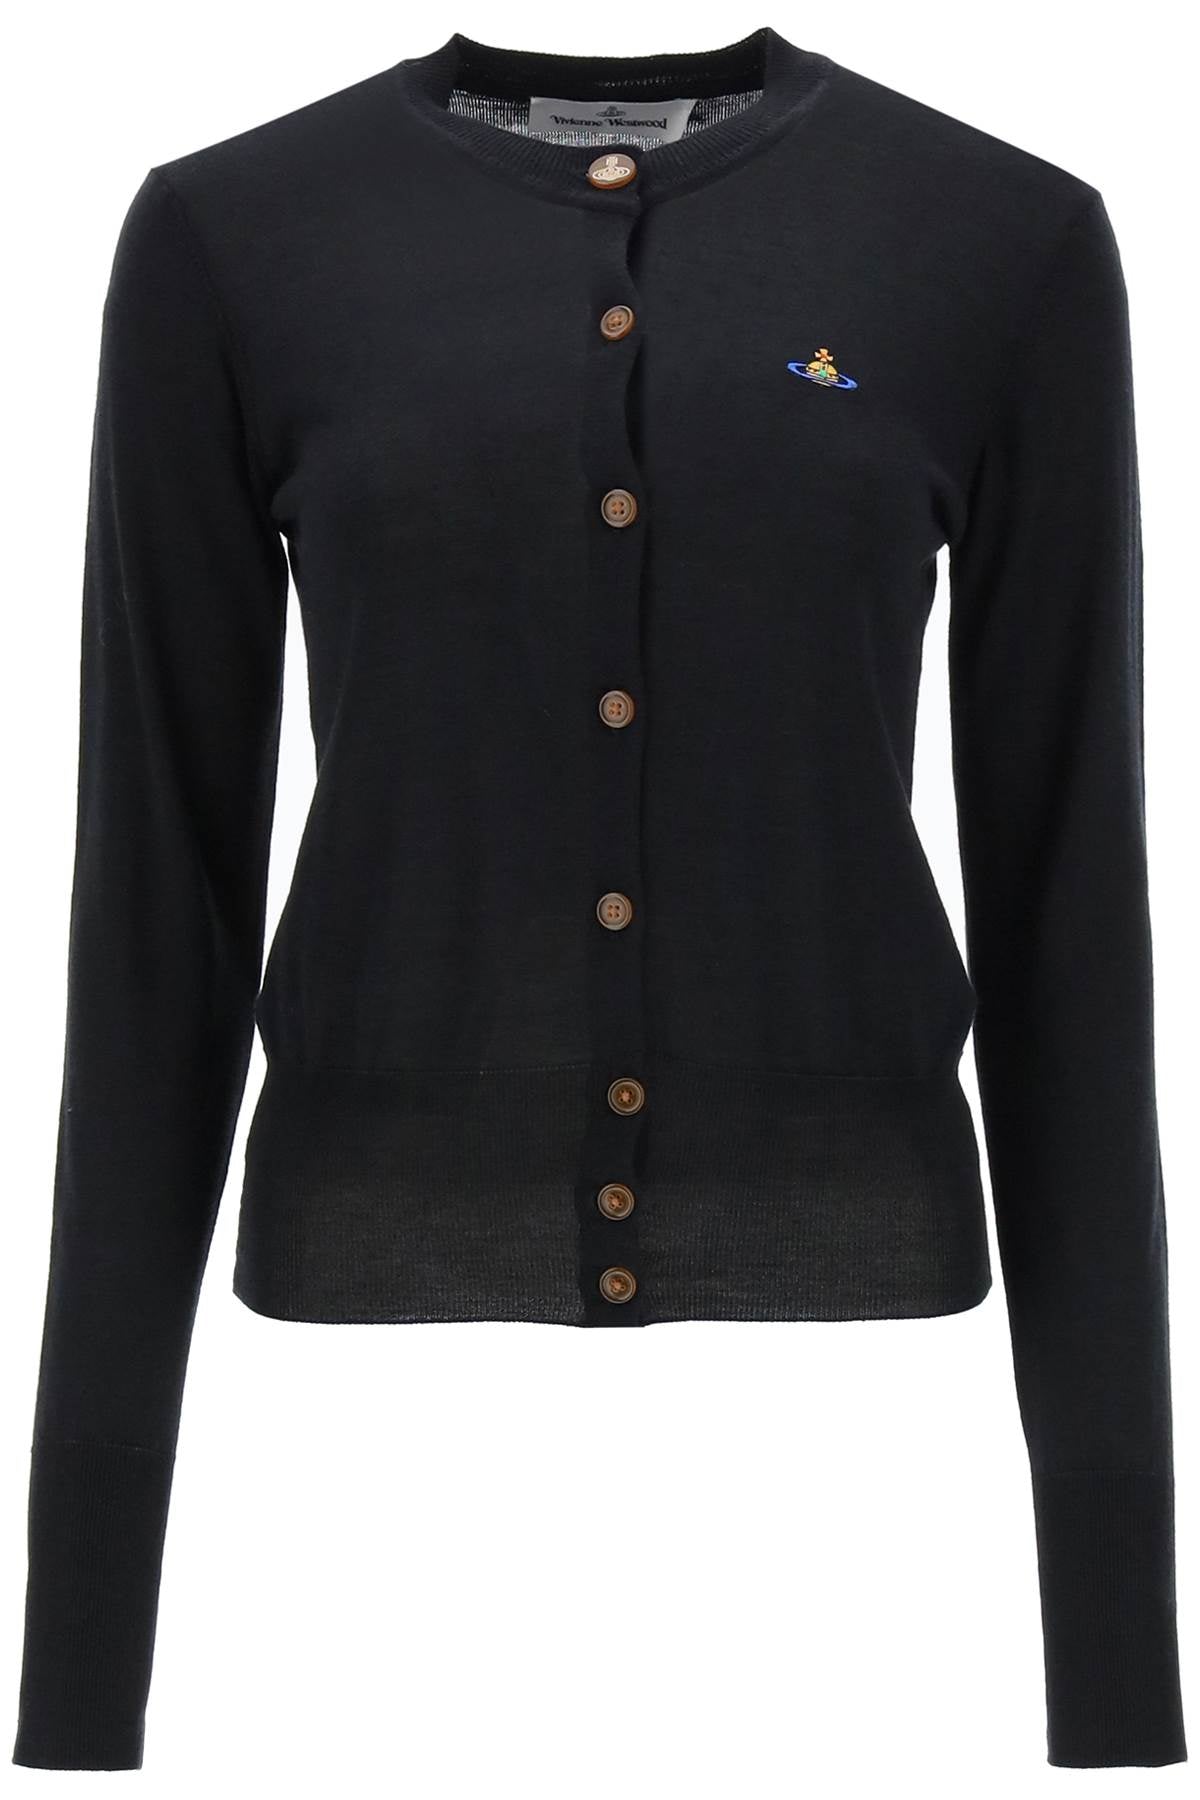 Vivienne westwood bea cardigan with embroidered logo-0